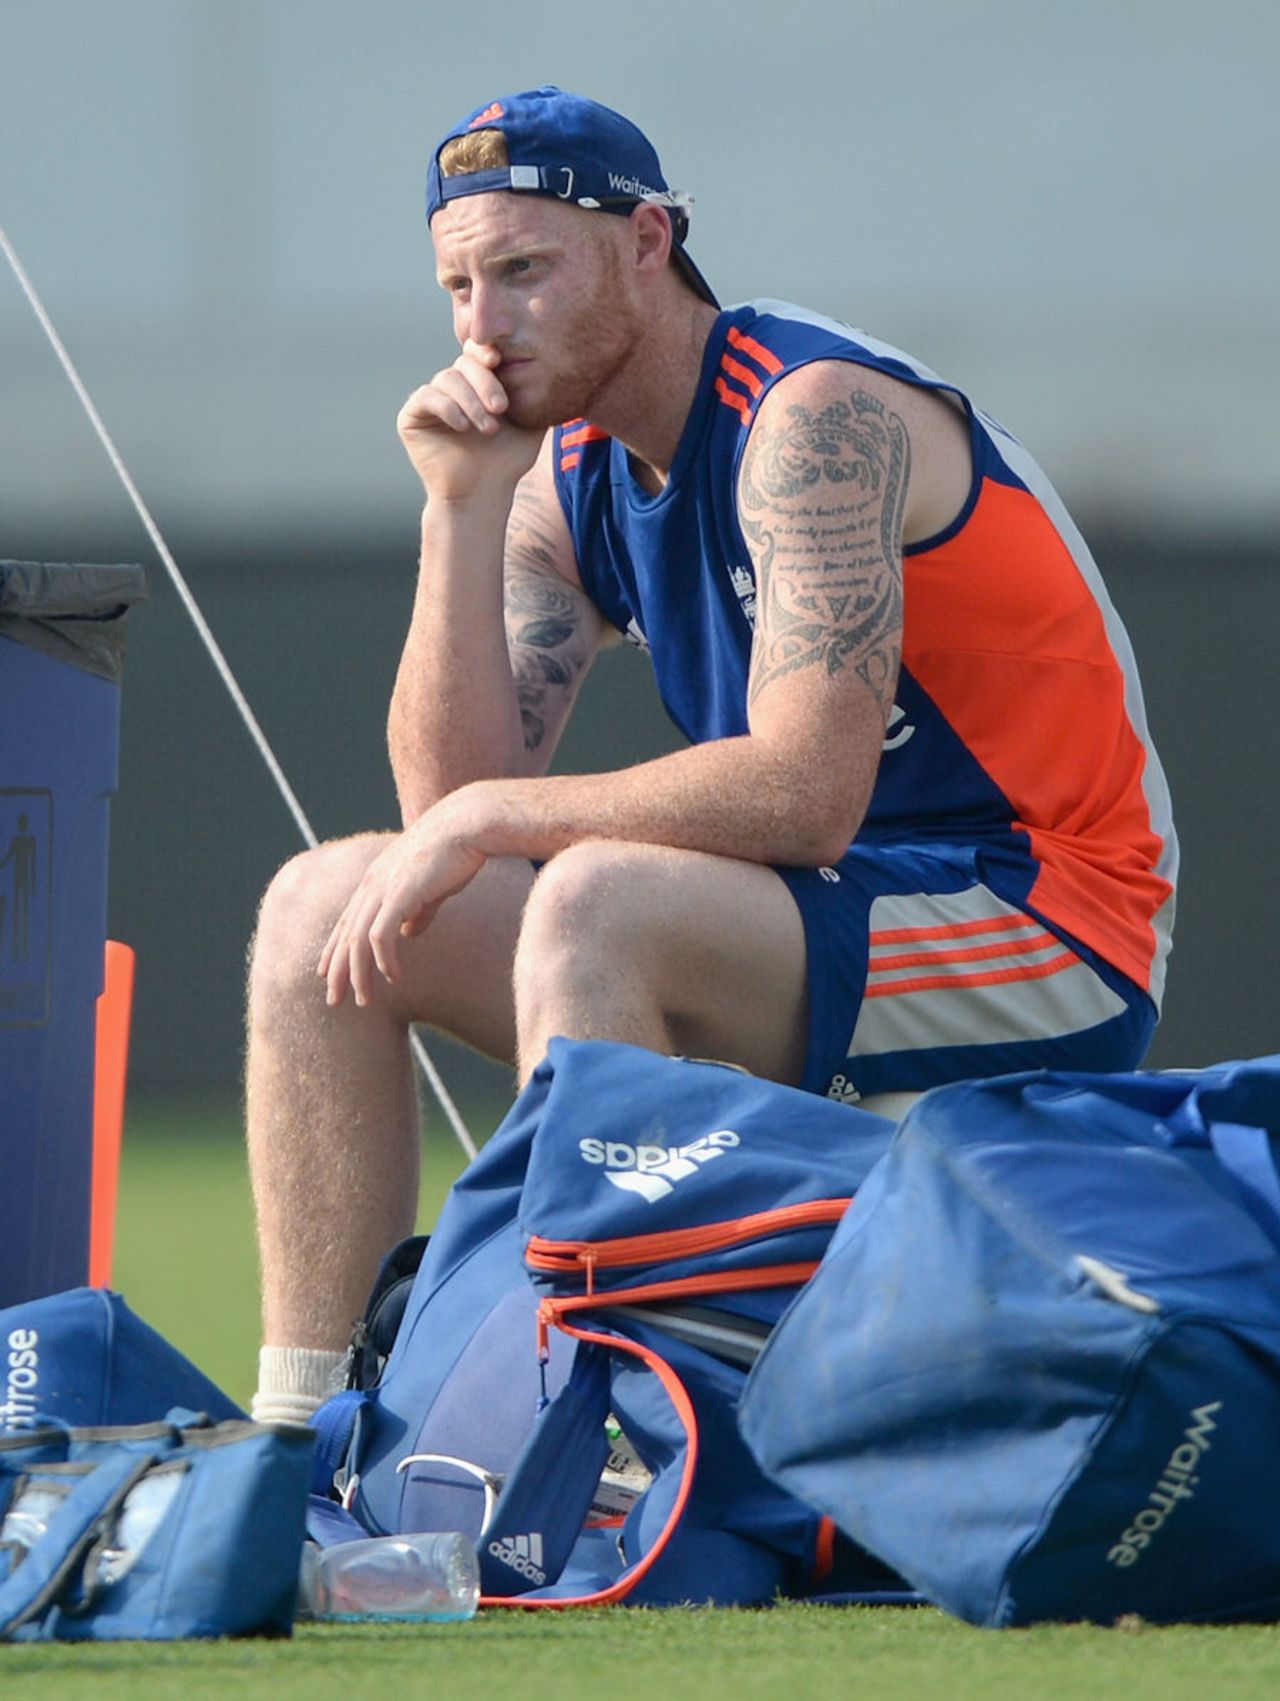 Ben Stokes declared himself fit after a stomach bug, Pakistan v England, second Test, Dubai, 1st day